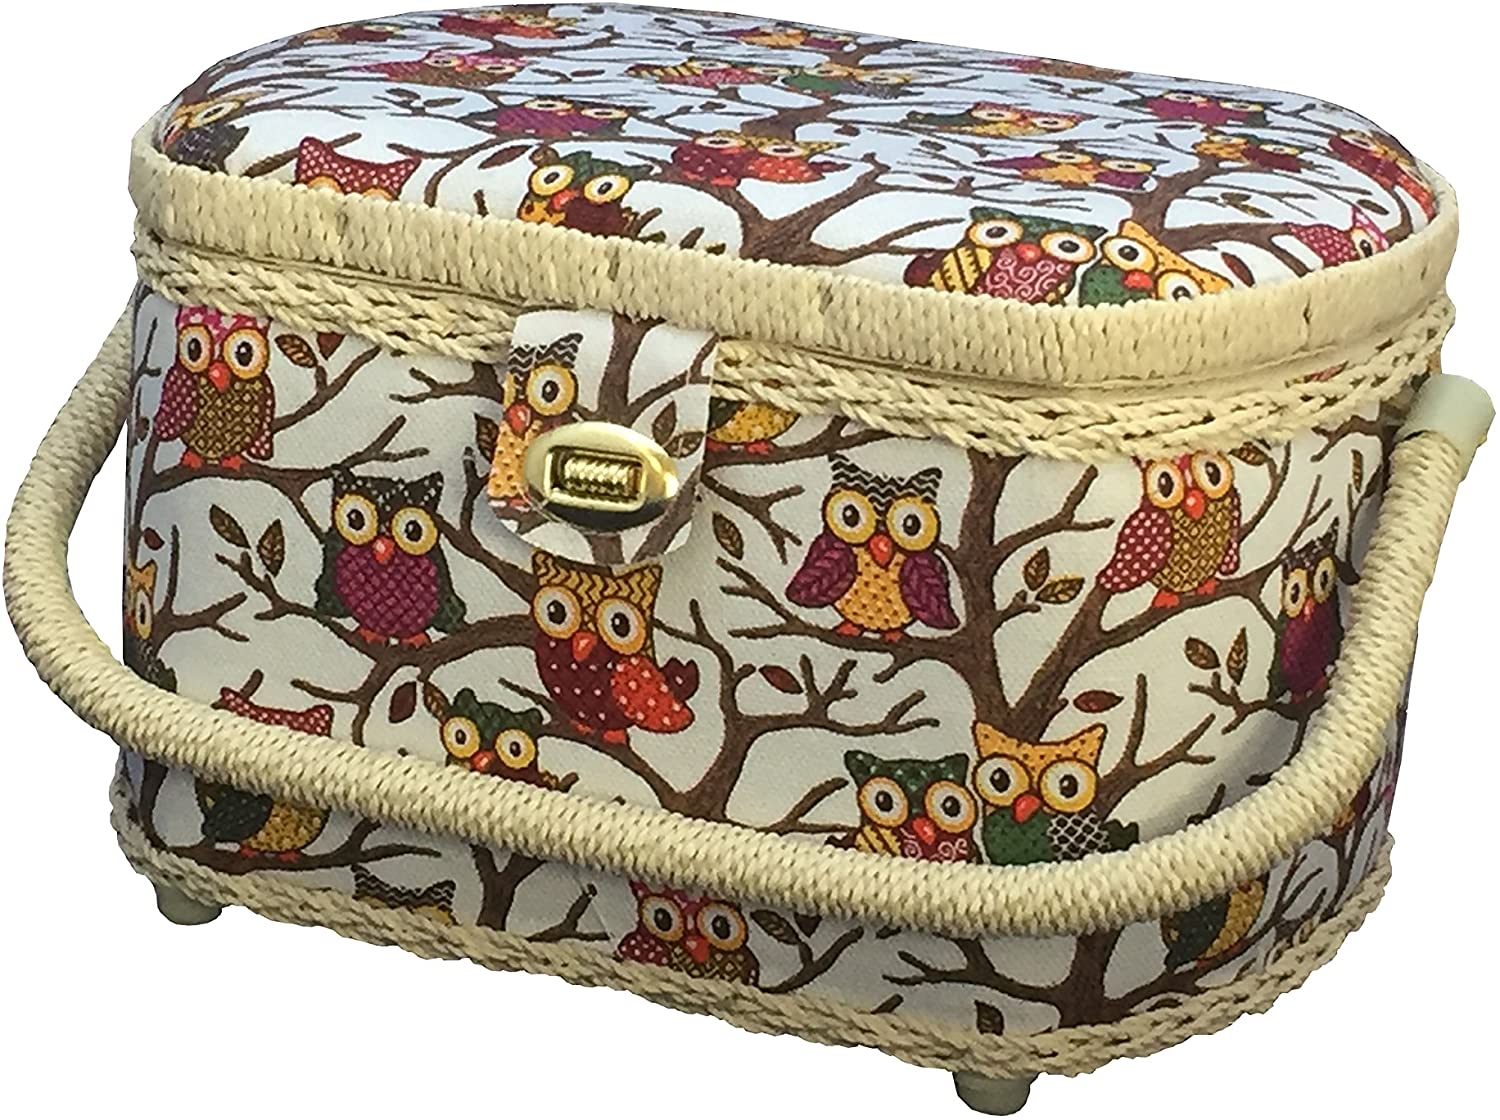 The Best Sewing Baskets in 2022